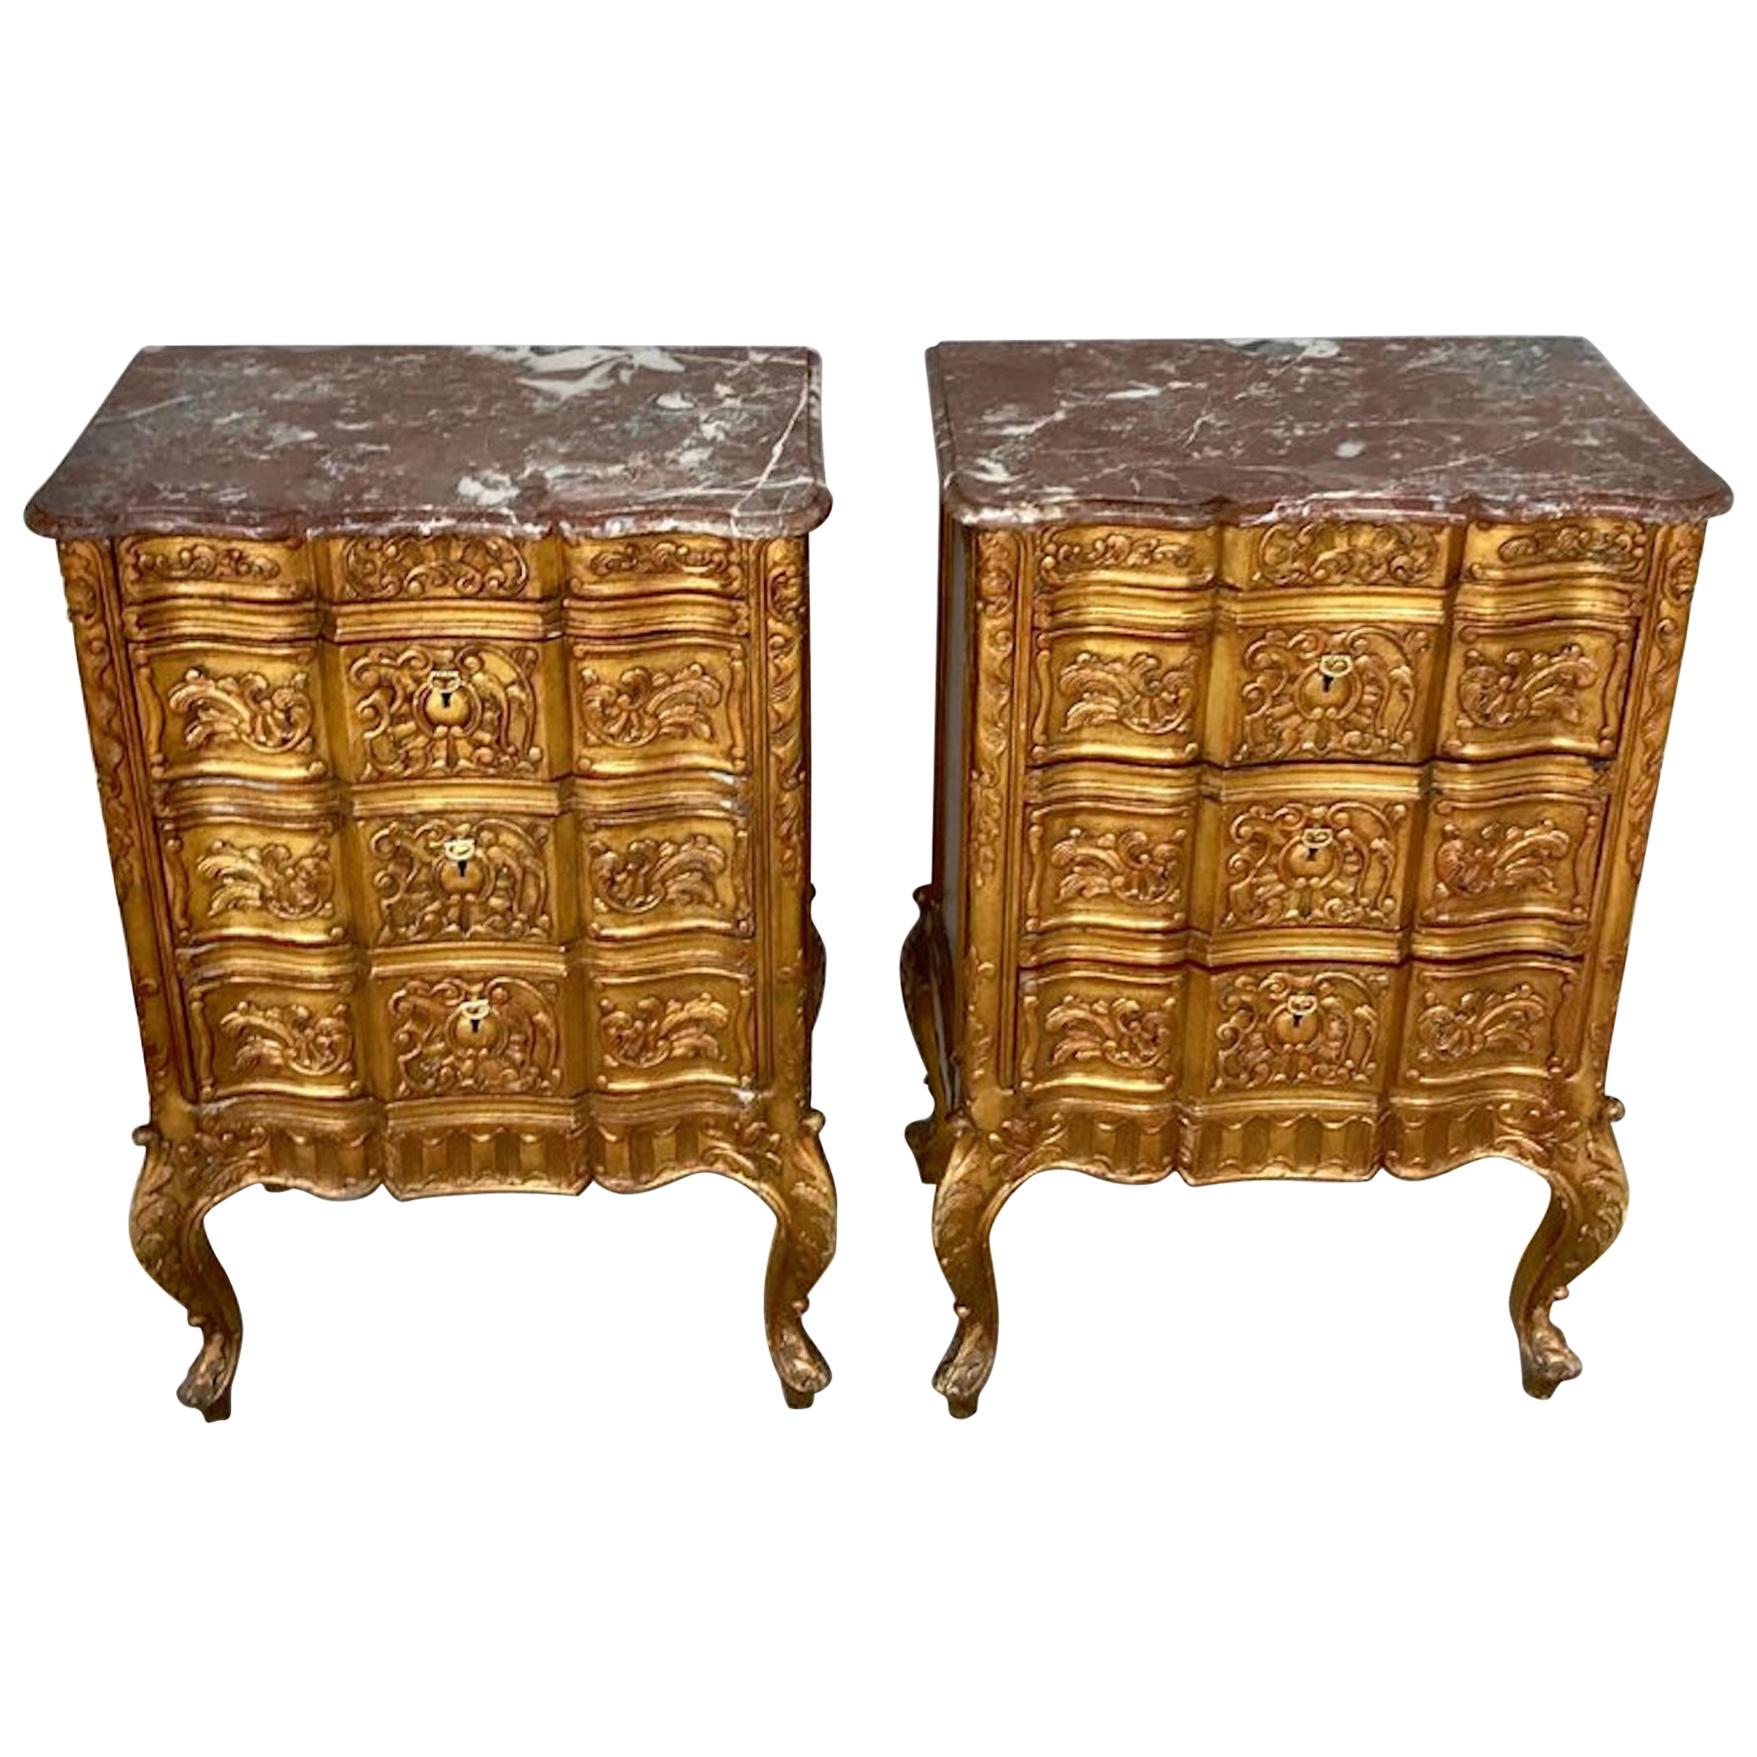 Pair of French Giltwood Diminutive Marble-Top Commodes For Sale